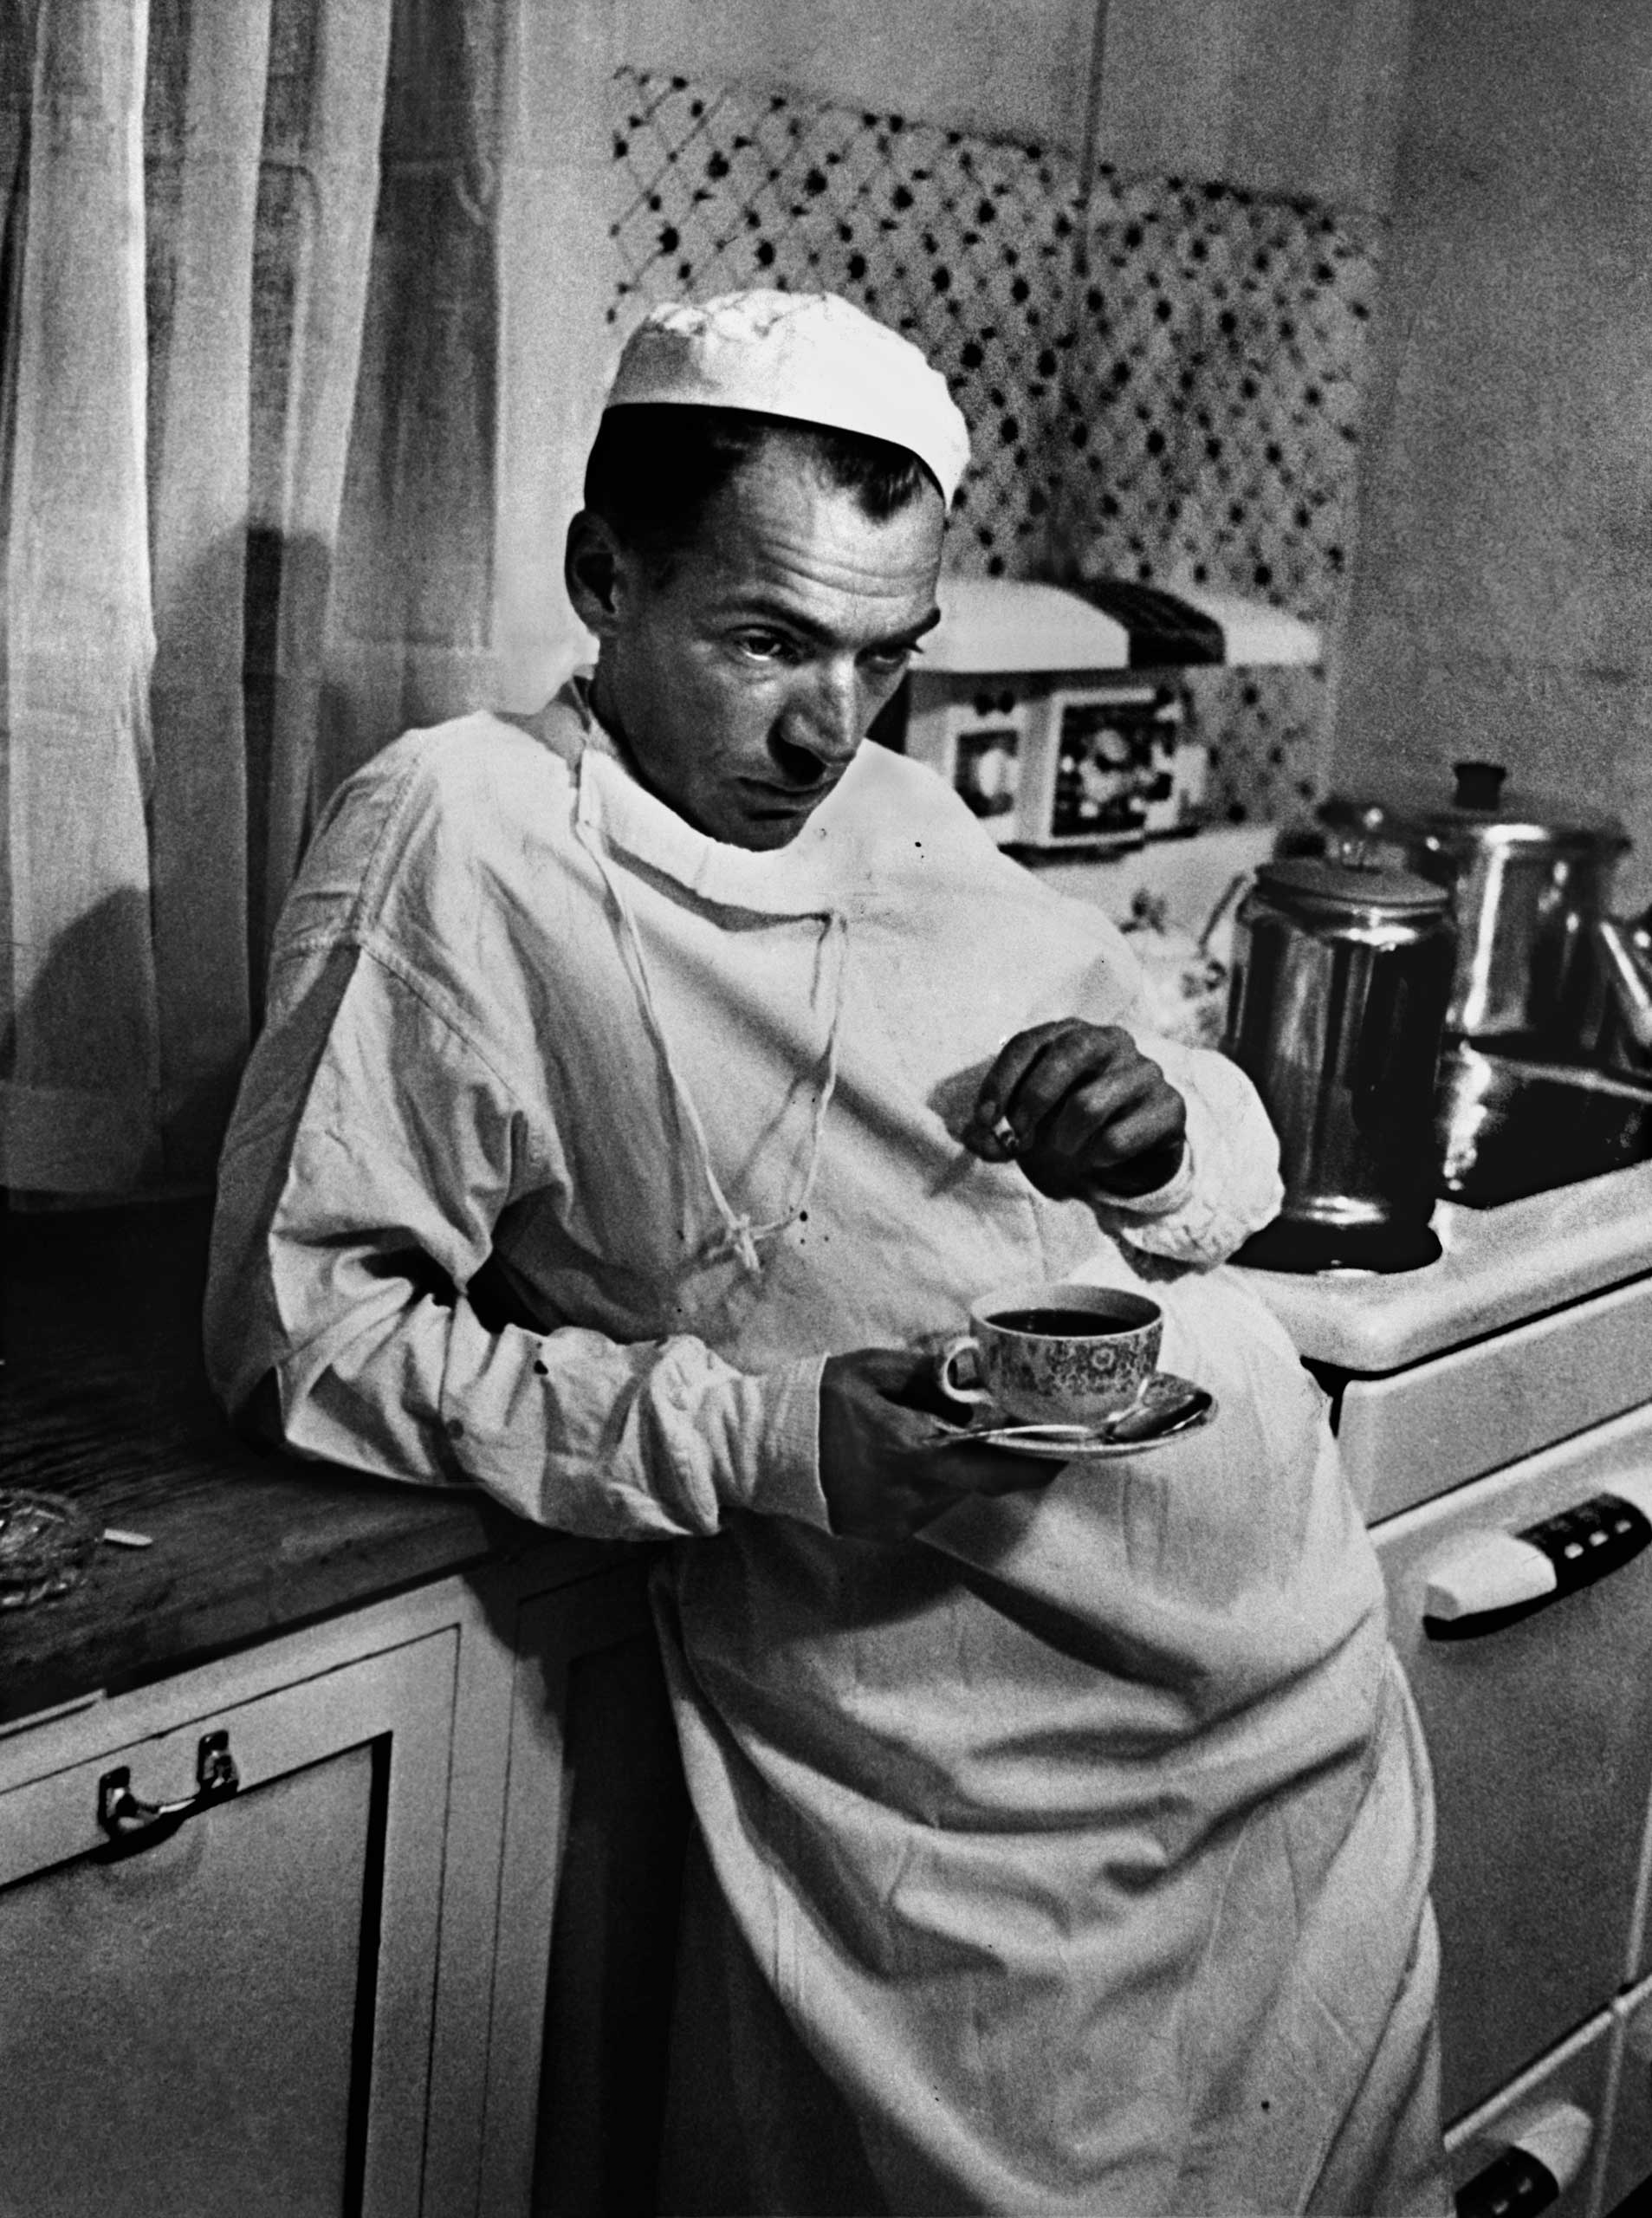 Dr. Ernest Ceriani, a general practitioner in tiny Kremmling, Colorado, stands in the town's hospital kitchen after a surgery that lasted until 2 AM. This was the final image in W. Eugene Smith's groundbreaking photo essay, "Country Doctor," originally published in the September 20, 1948, issue of LIFE.